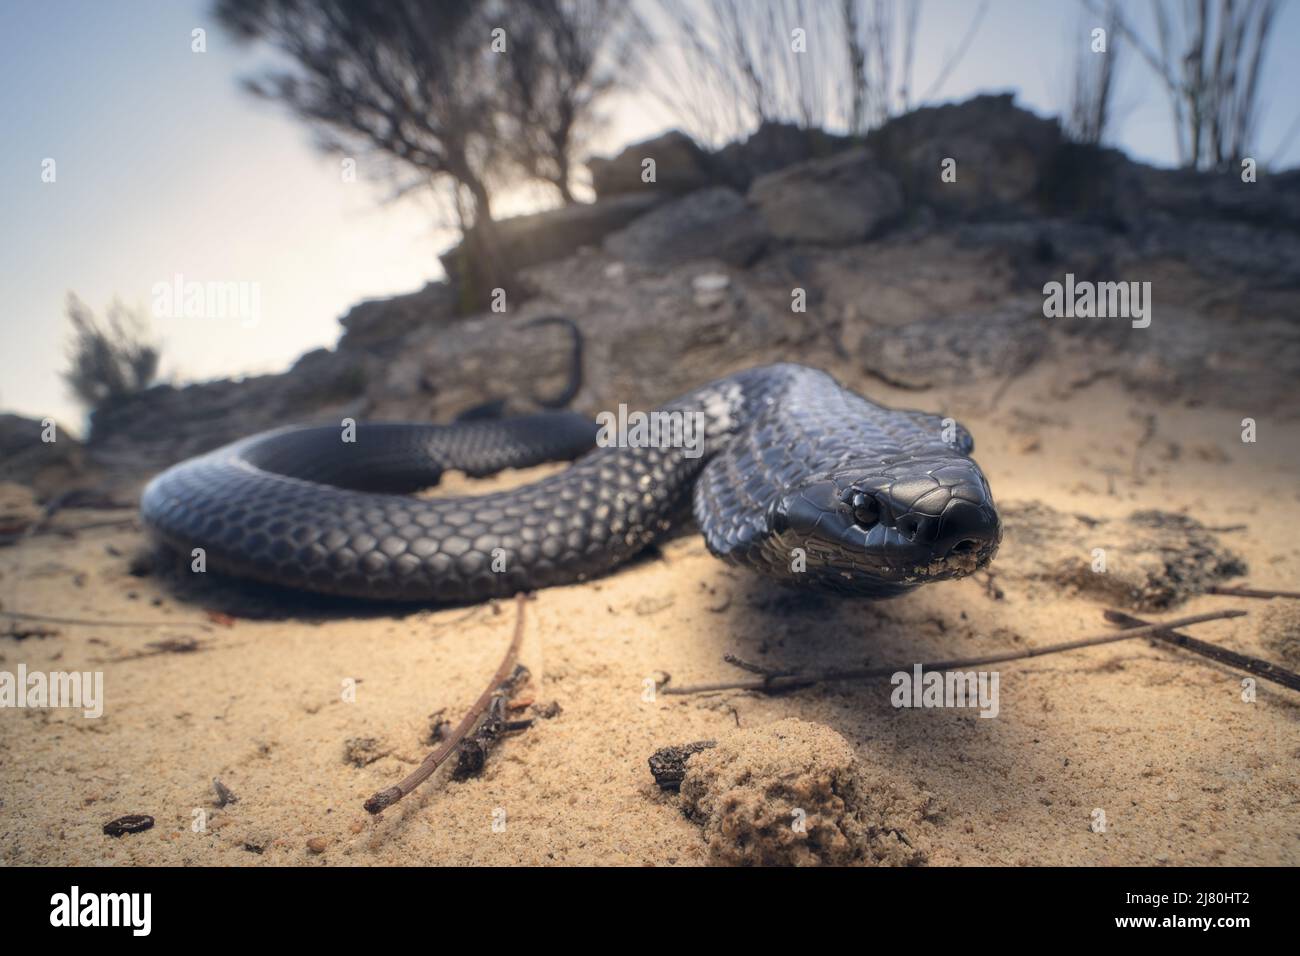 Close-up of a wild tiger snake (Notechis scutatus) in outback, South Australia, Australia Stock Photo